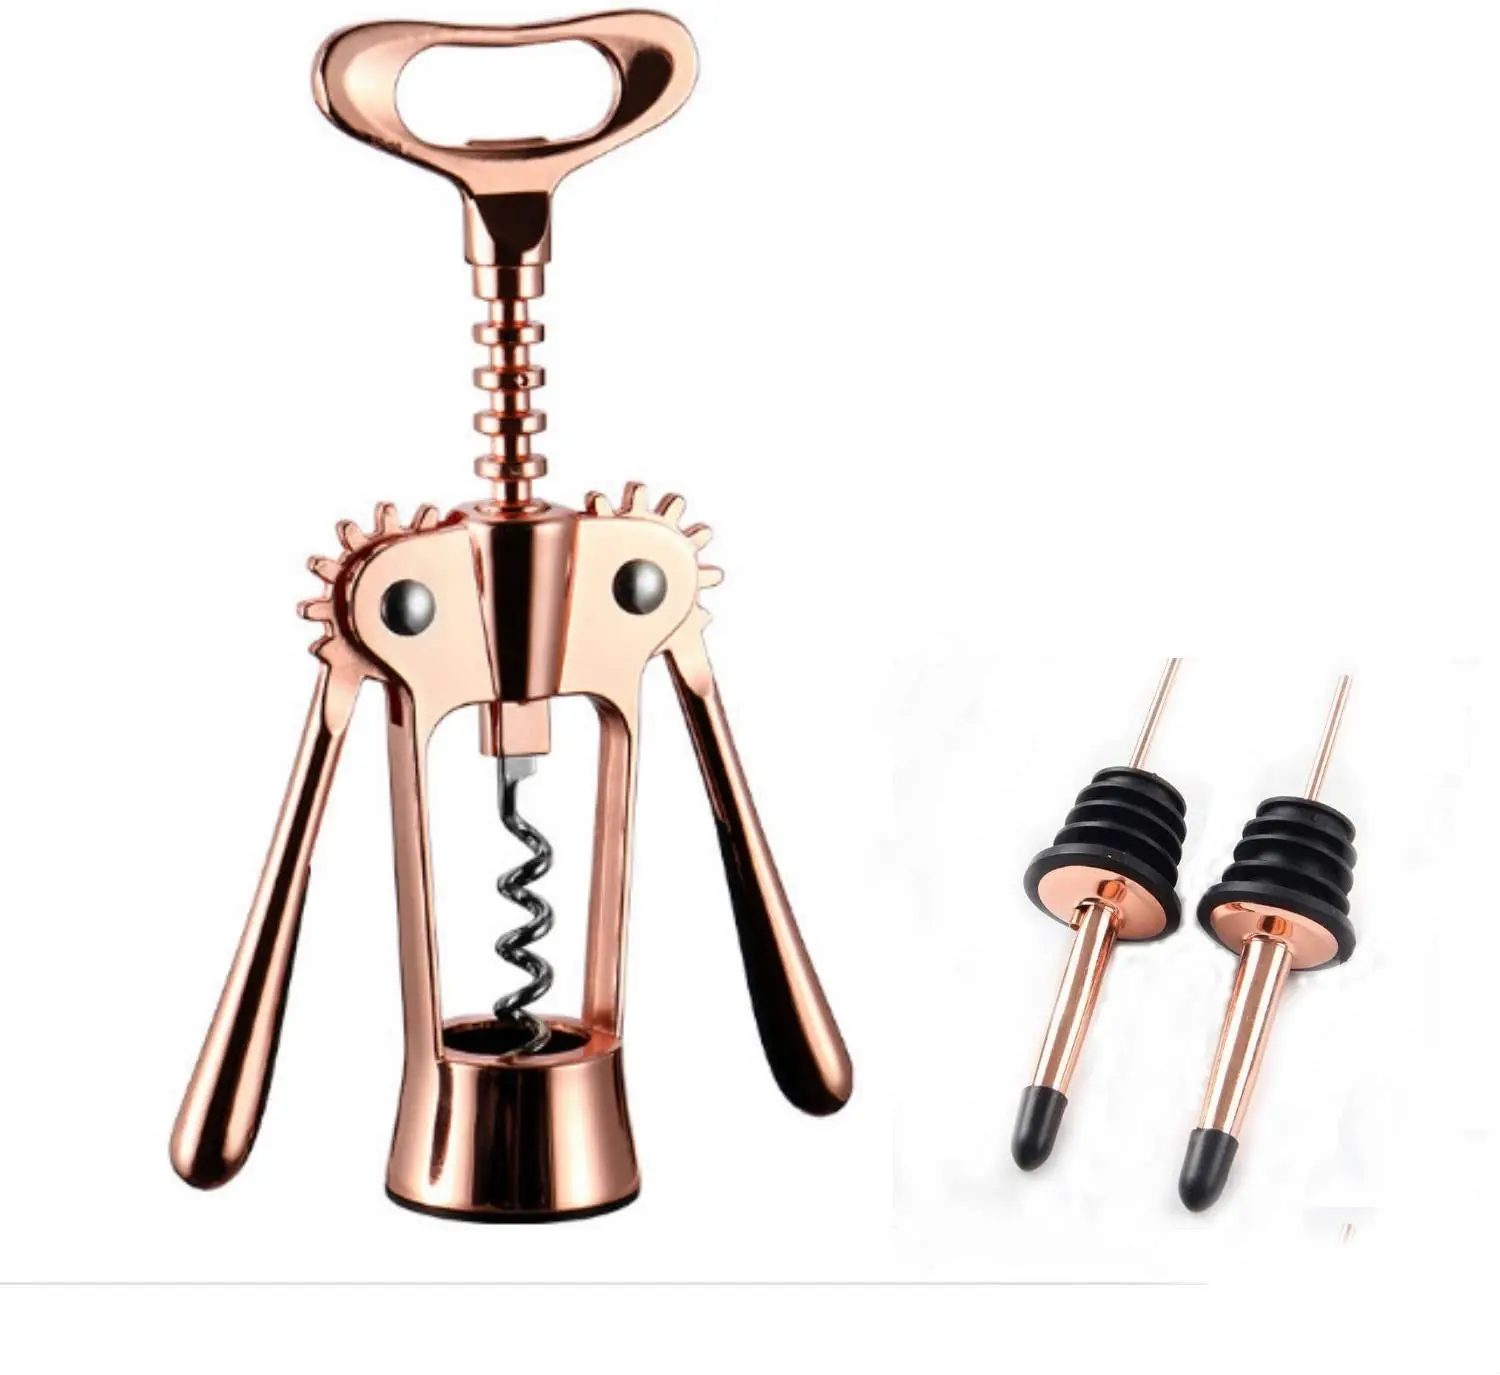 

2 IN 1 Wing Corkscrew Wine Bottle Opener - Manual Wine Cork and Beer Cap Remover Kit - Stainless Steel Opener With Wine Pourer